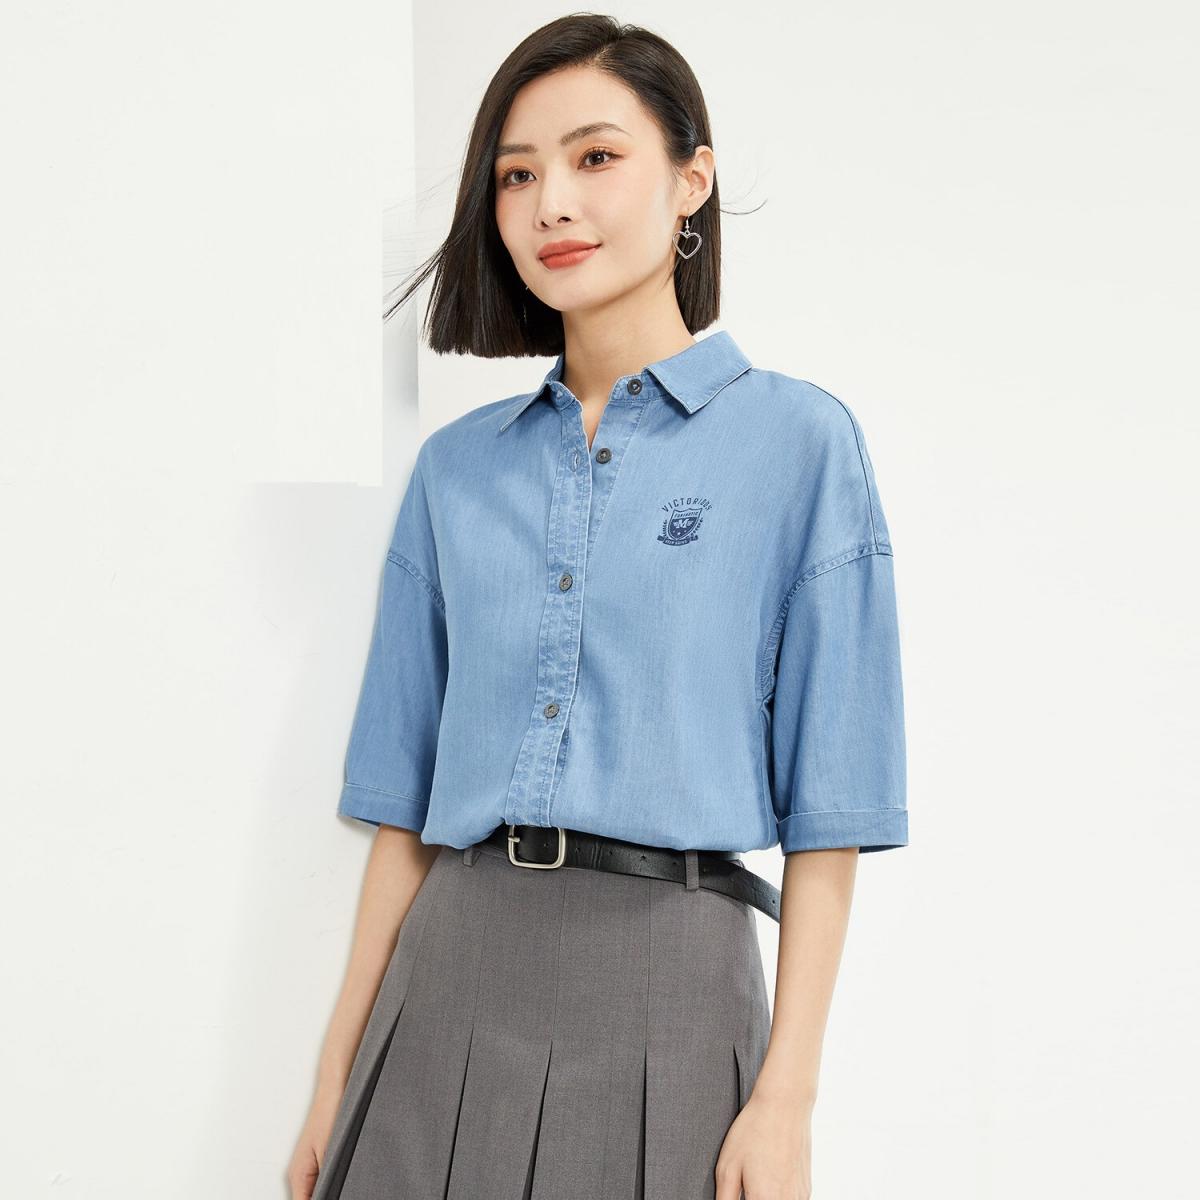 【Online Exclusive】BM Women's Sunscreen Denim Short-sleeved Loose Fit Casual Shirt (Size S)